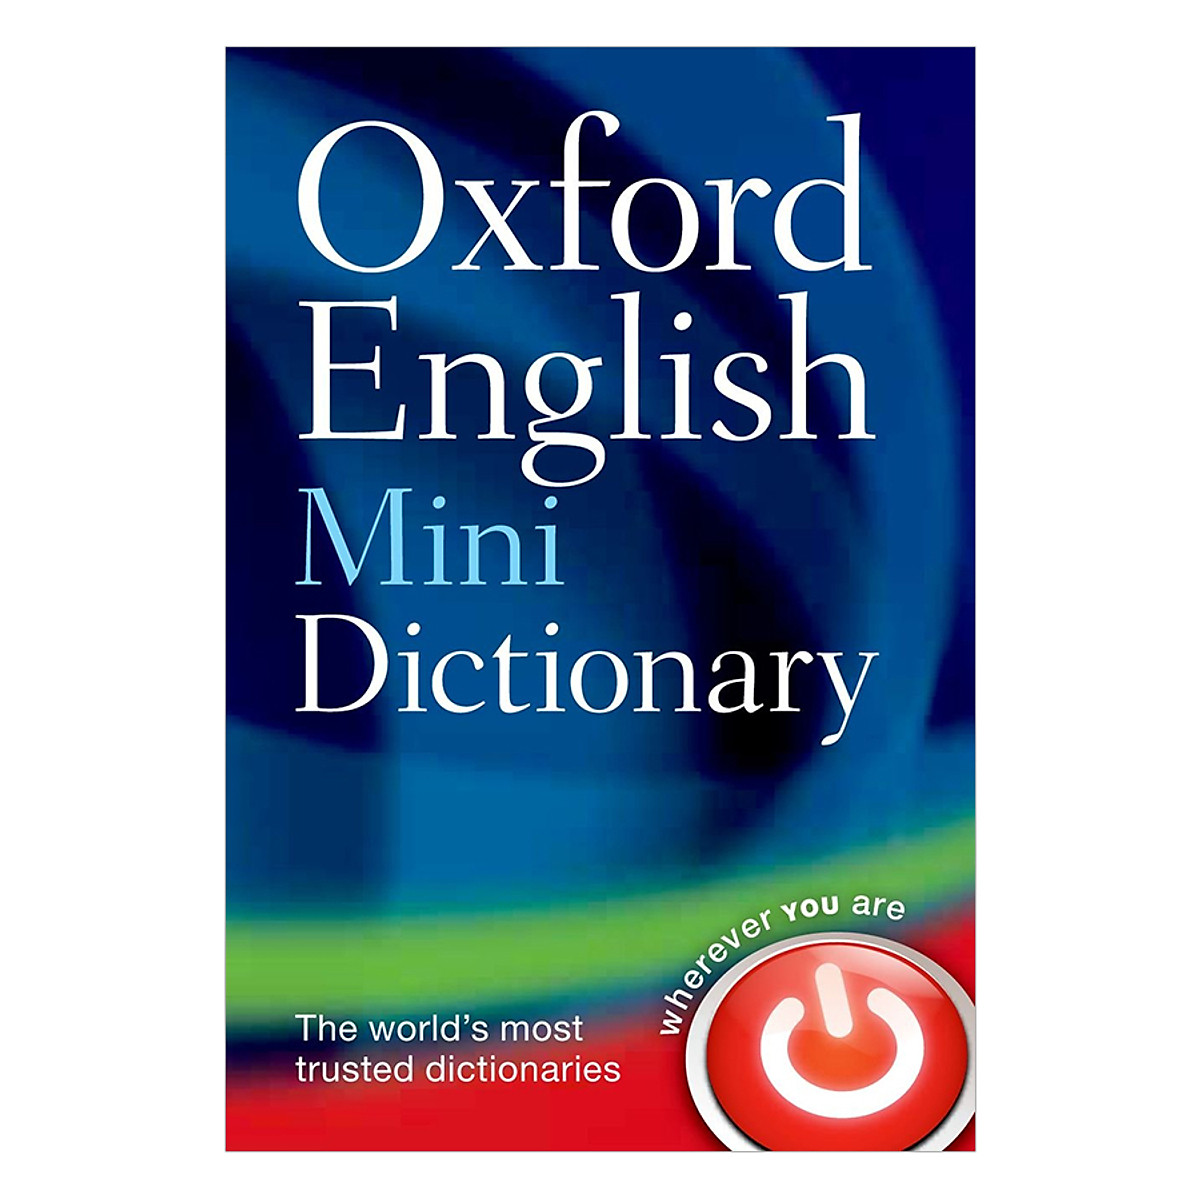 Oxford English Mini Dictionary (The World's Most Trusted Dictionaries) (Wherever You Are) (Eighth Edition)